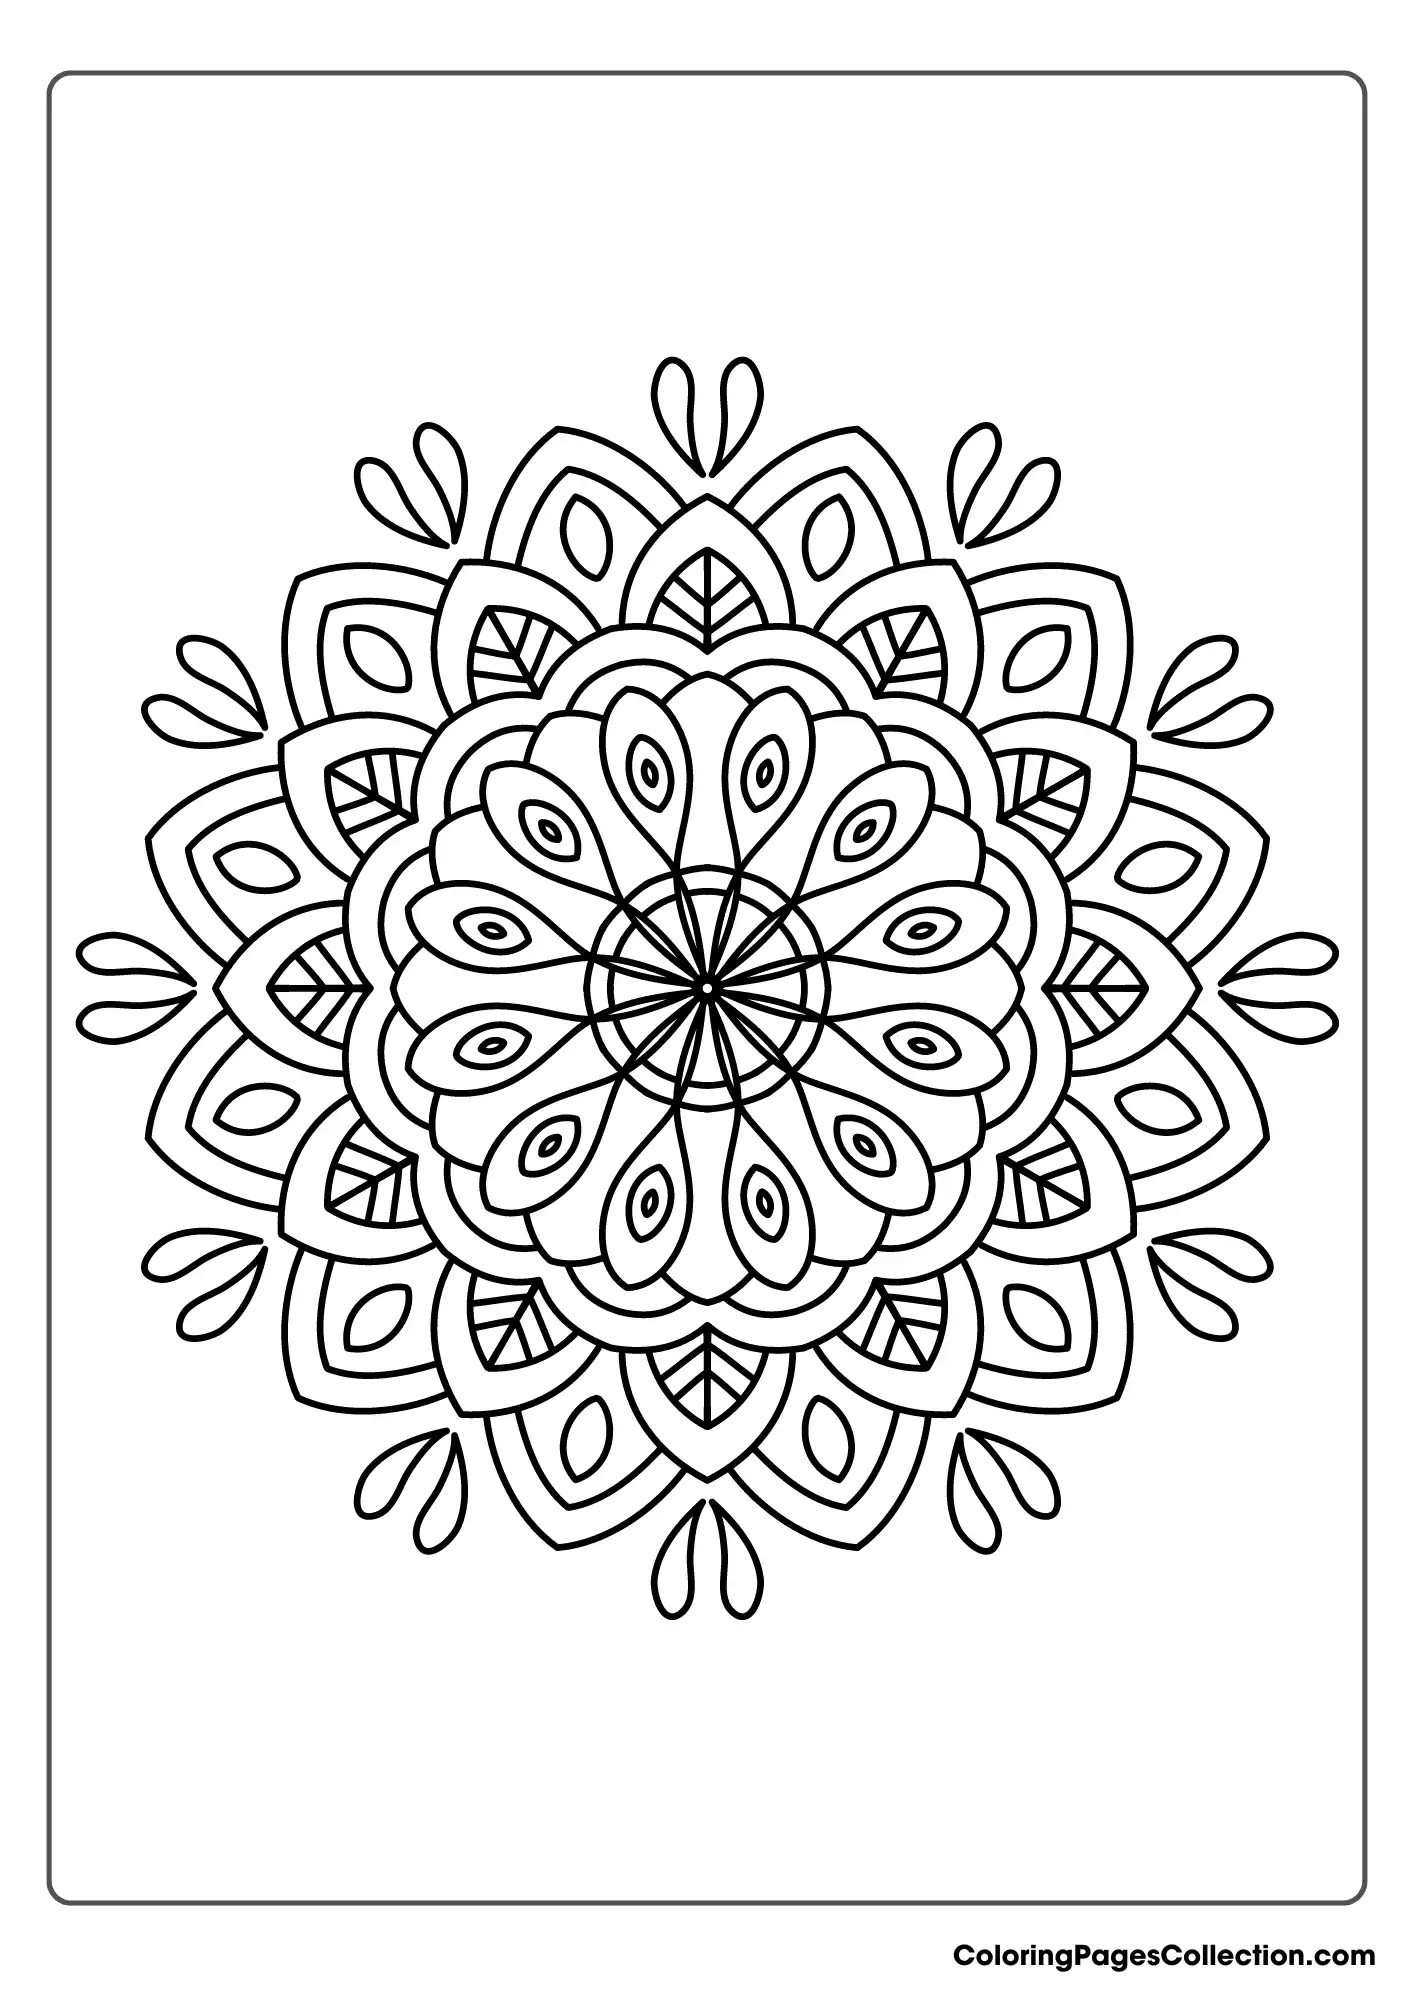 Coloring pages for teens, Design Art 2